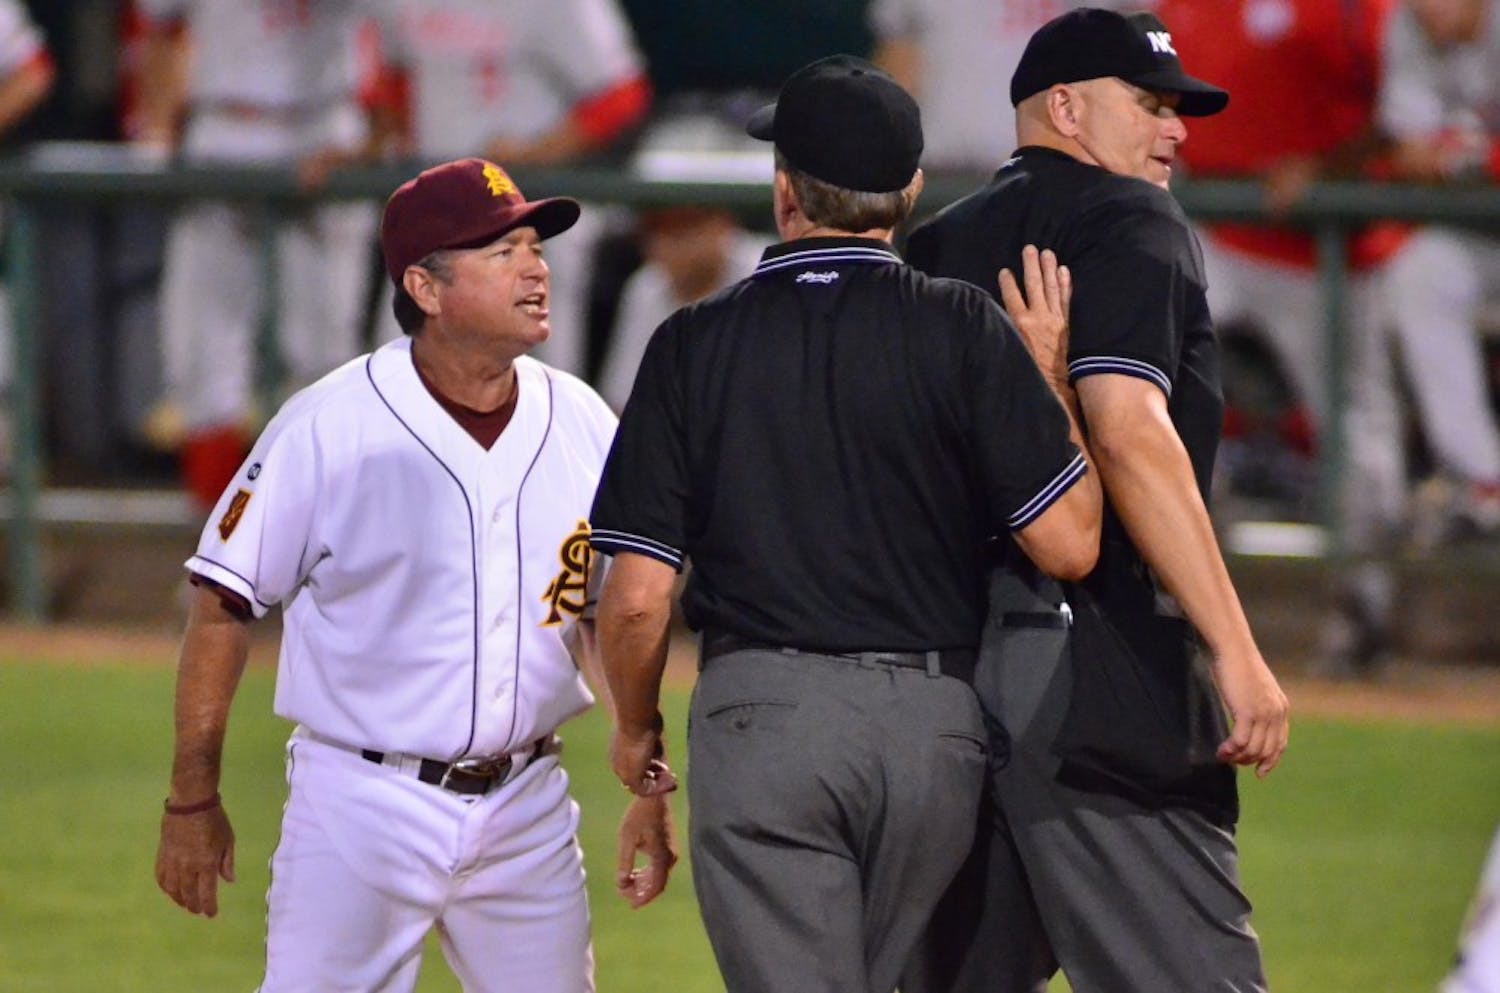 Steady presence: ASU coach Tim Esmay argues with the umpiring crew during the Sun Devils’ 4-2 win over New Mexico on June 3. Esmay’s leadership this past season was a large part of the team’s success. (Photo by Aaron Lavinsky)